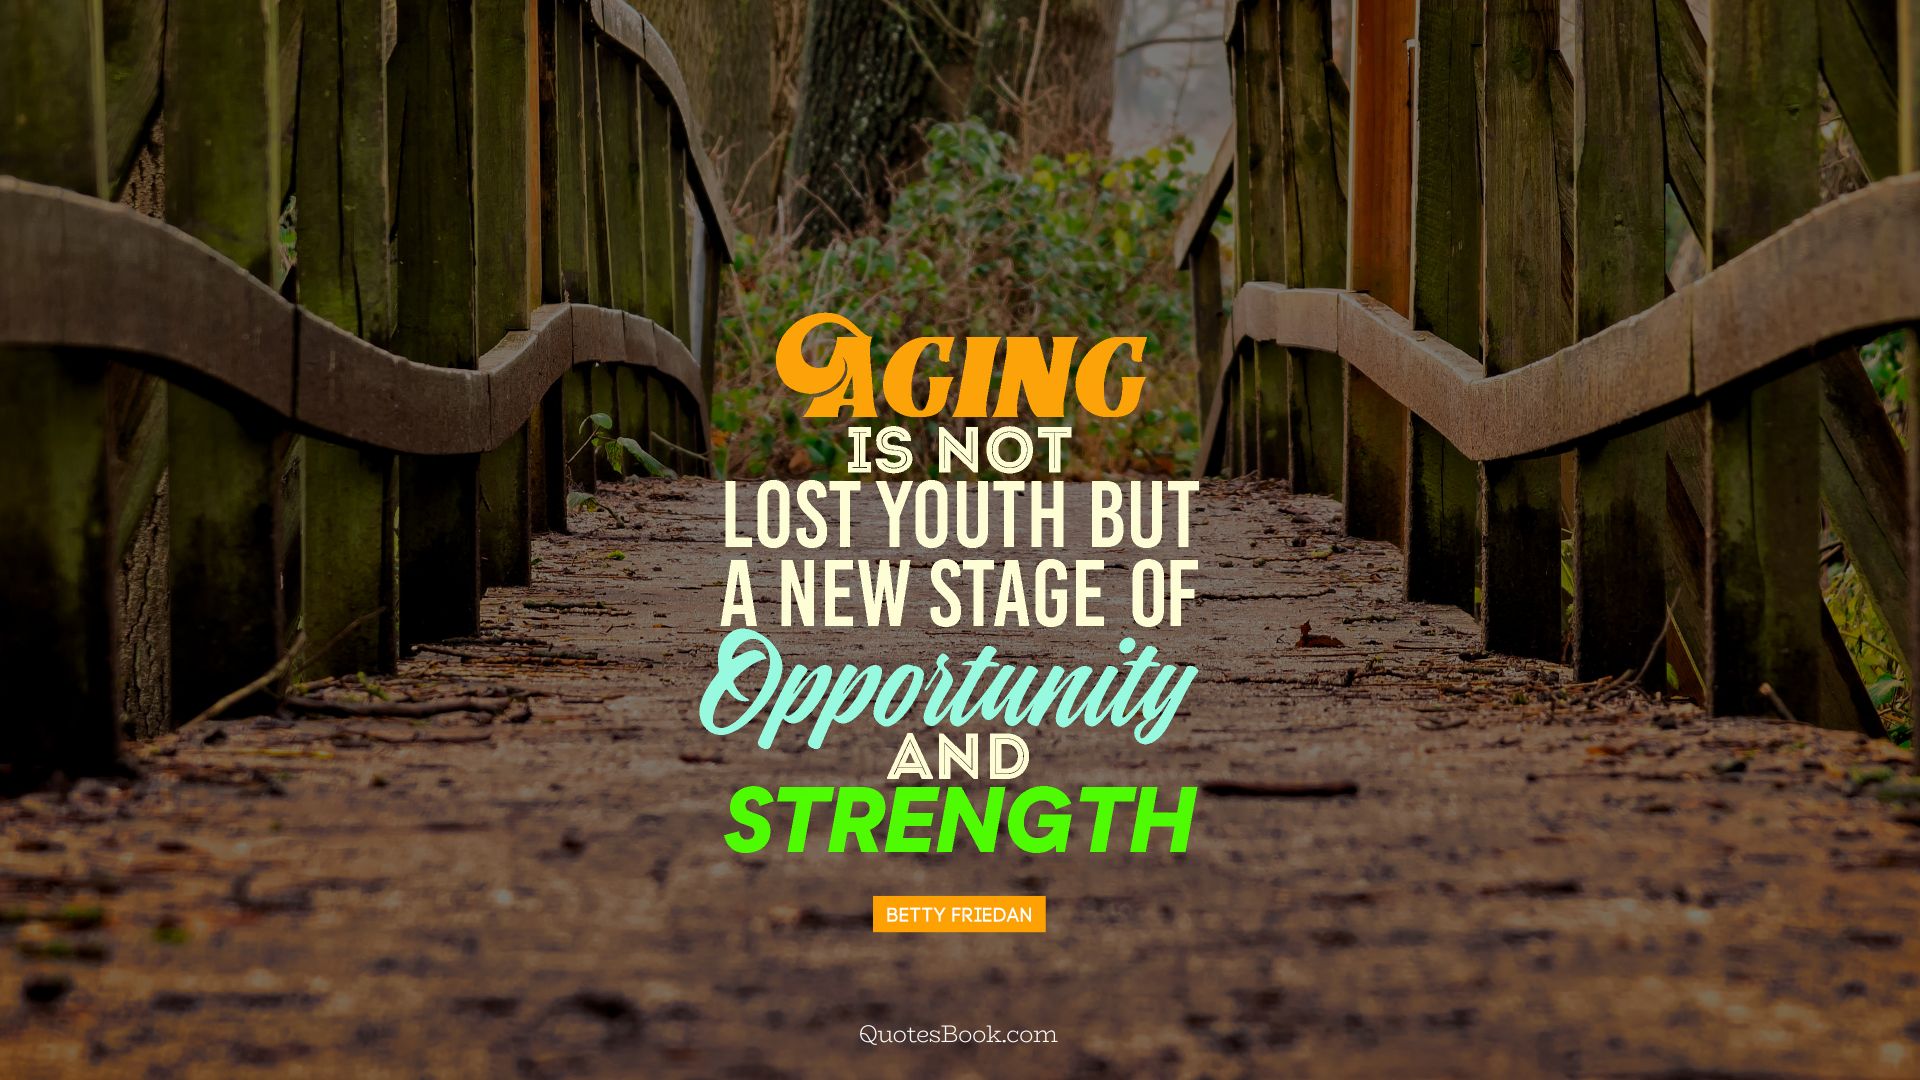 Aging is not lost youth but a new stage of opportunity and strength. - Quote by Betty Friedan